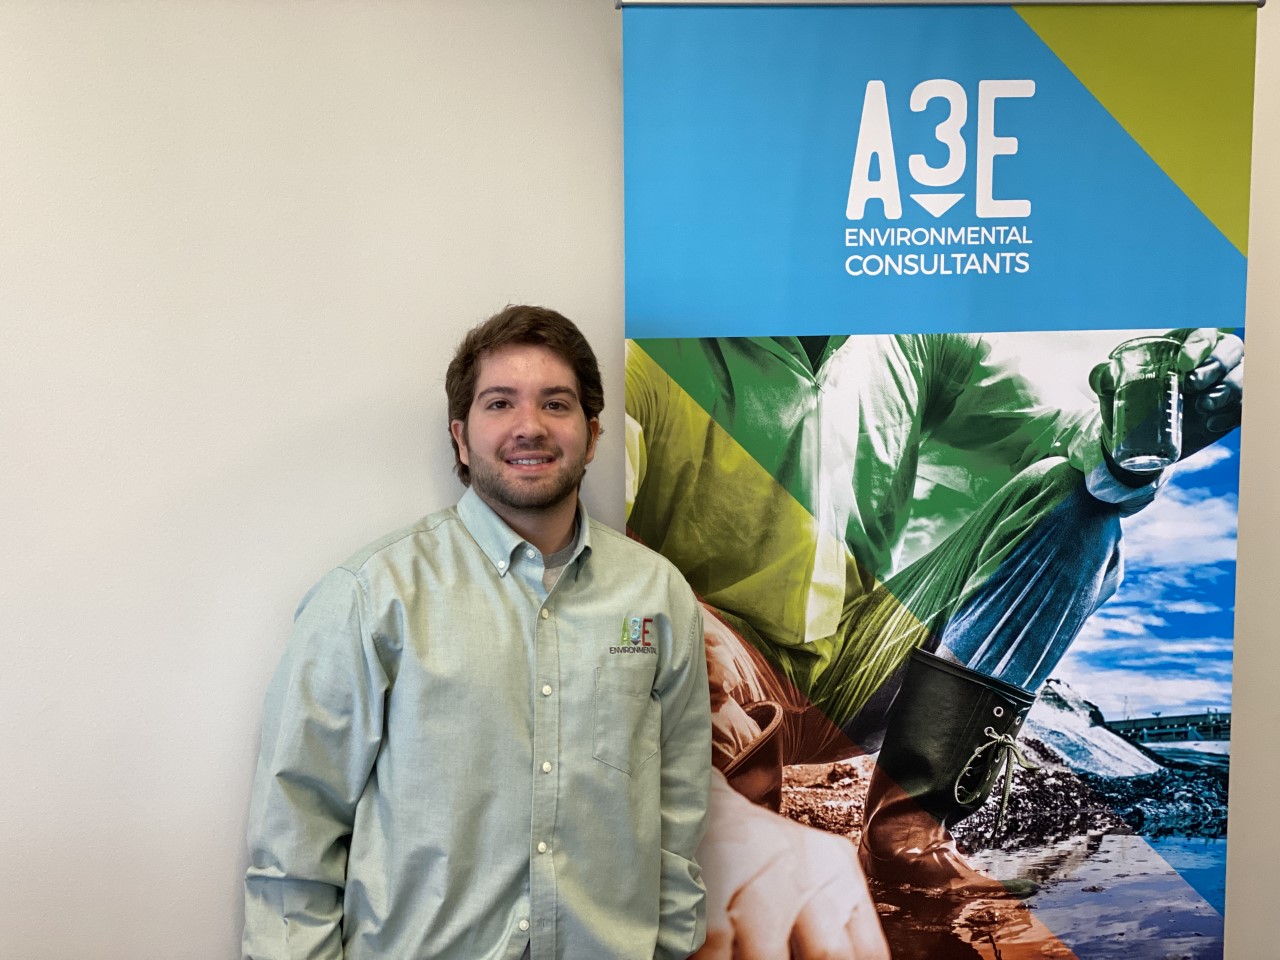 A3 Environmental Consultants is pleased to introduce our summer intern, Andreas Kougias.